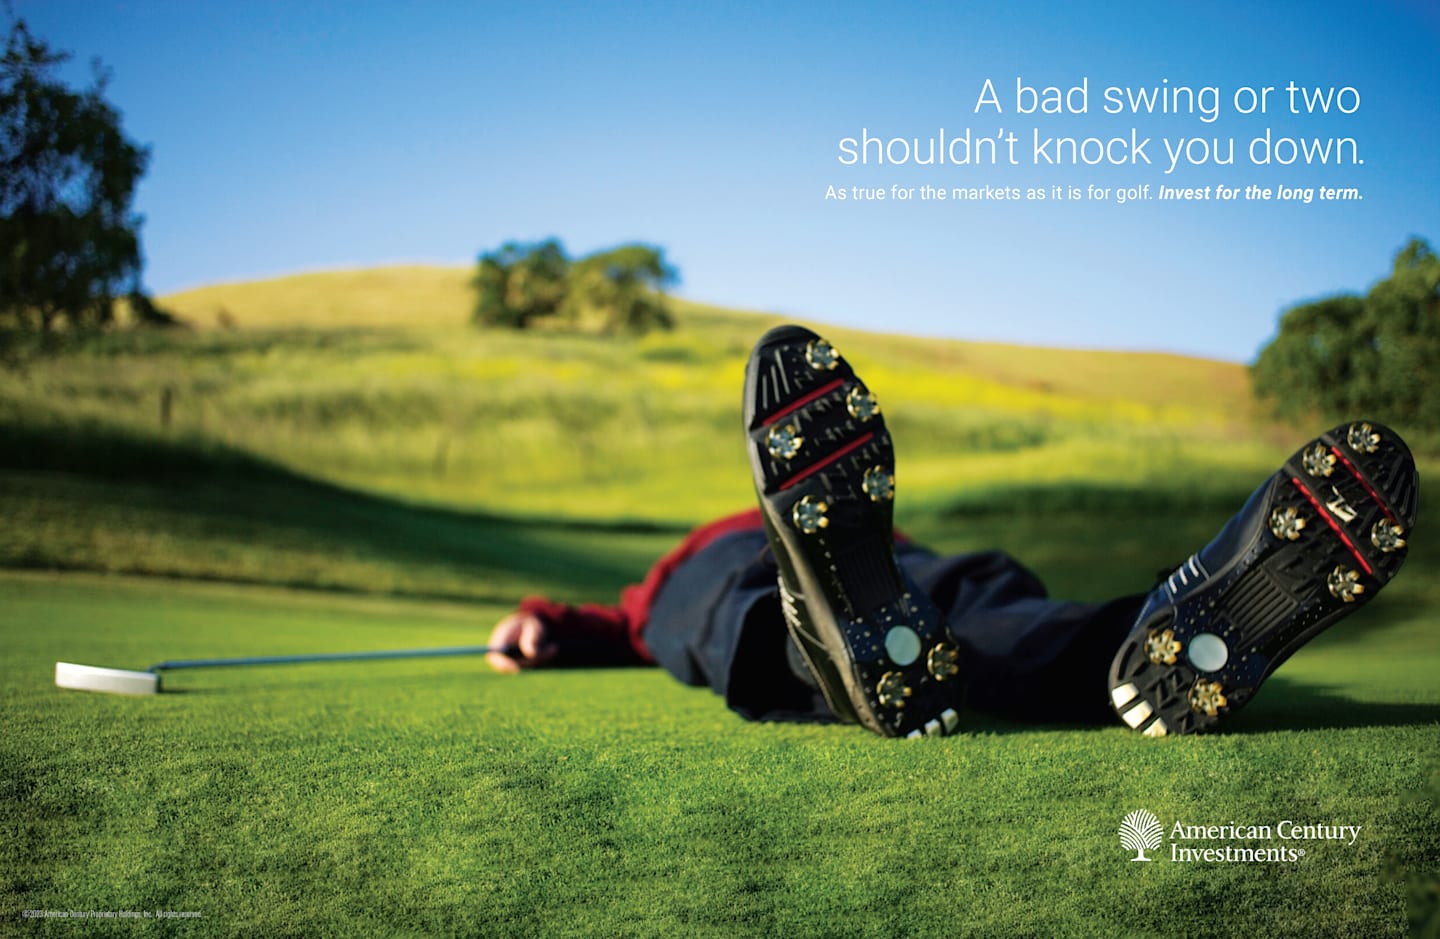 One Bad Swing campaign image.